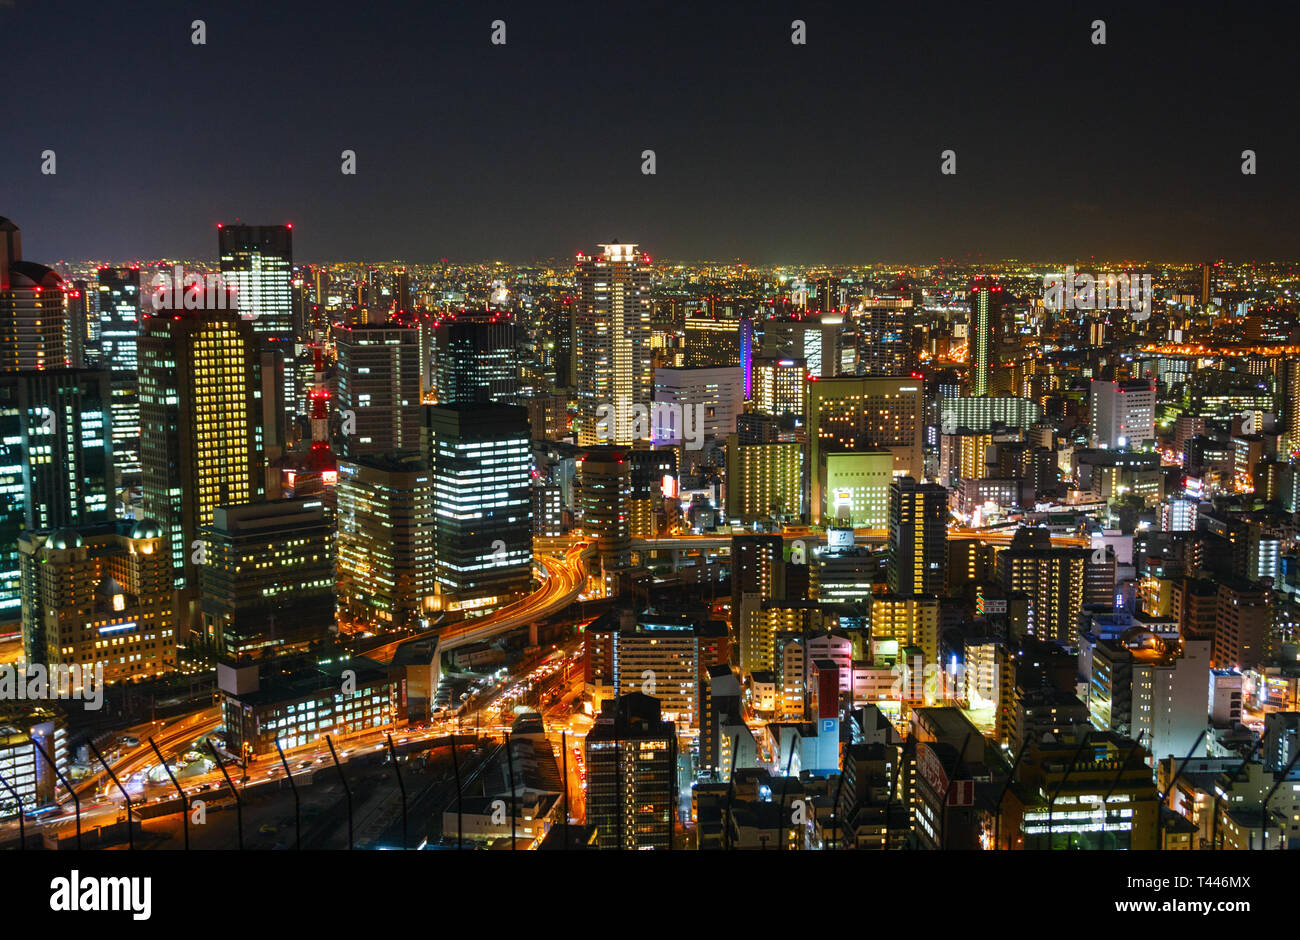 Aerial view of the Umeda district with numerous skyscrapers at night. Osaka, Japan Stock Photo